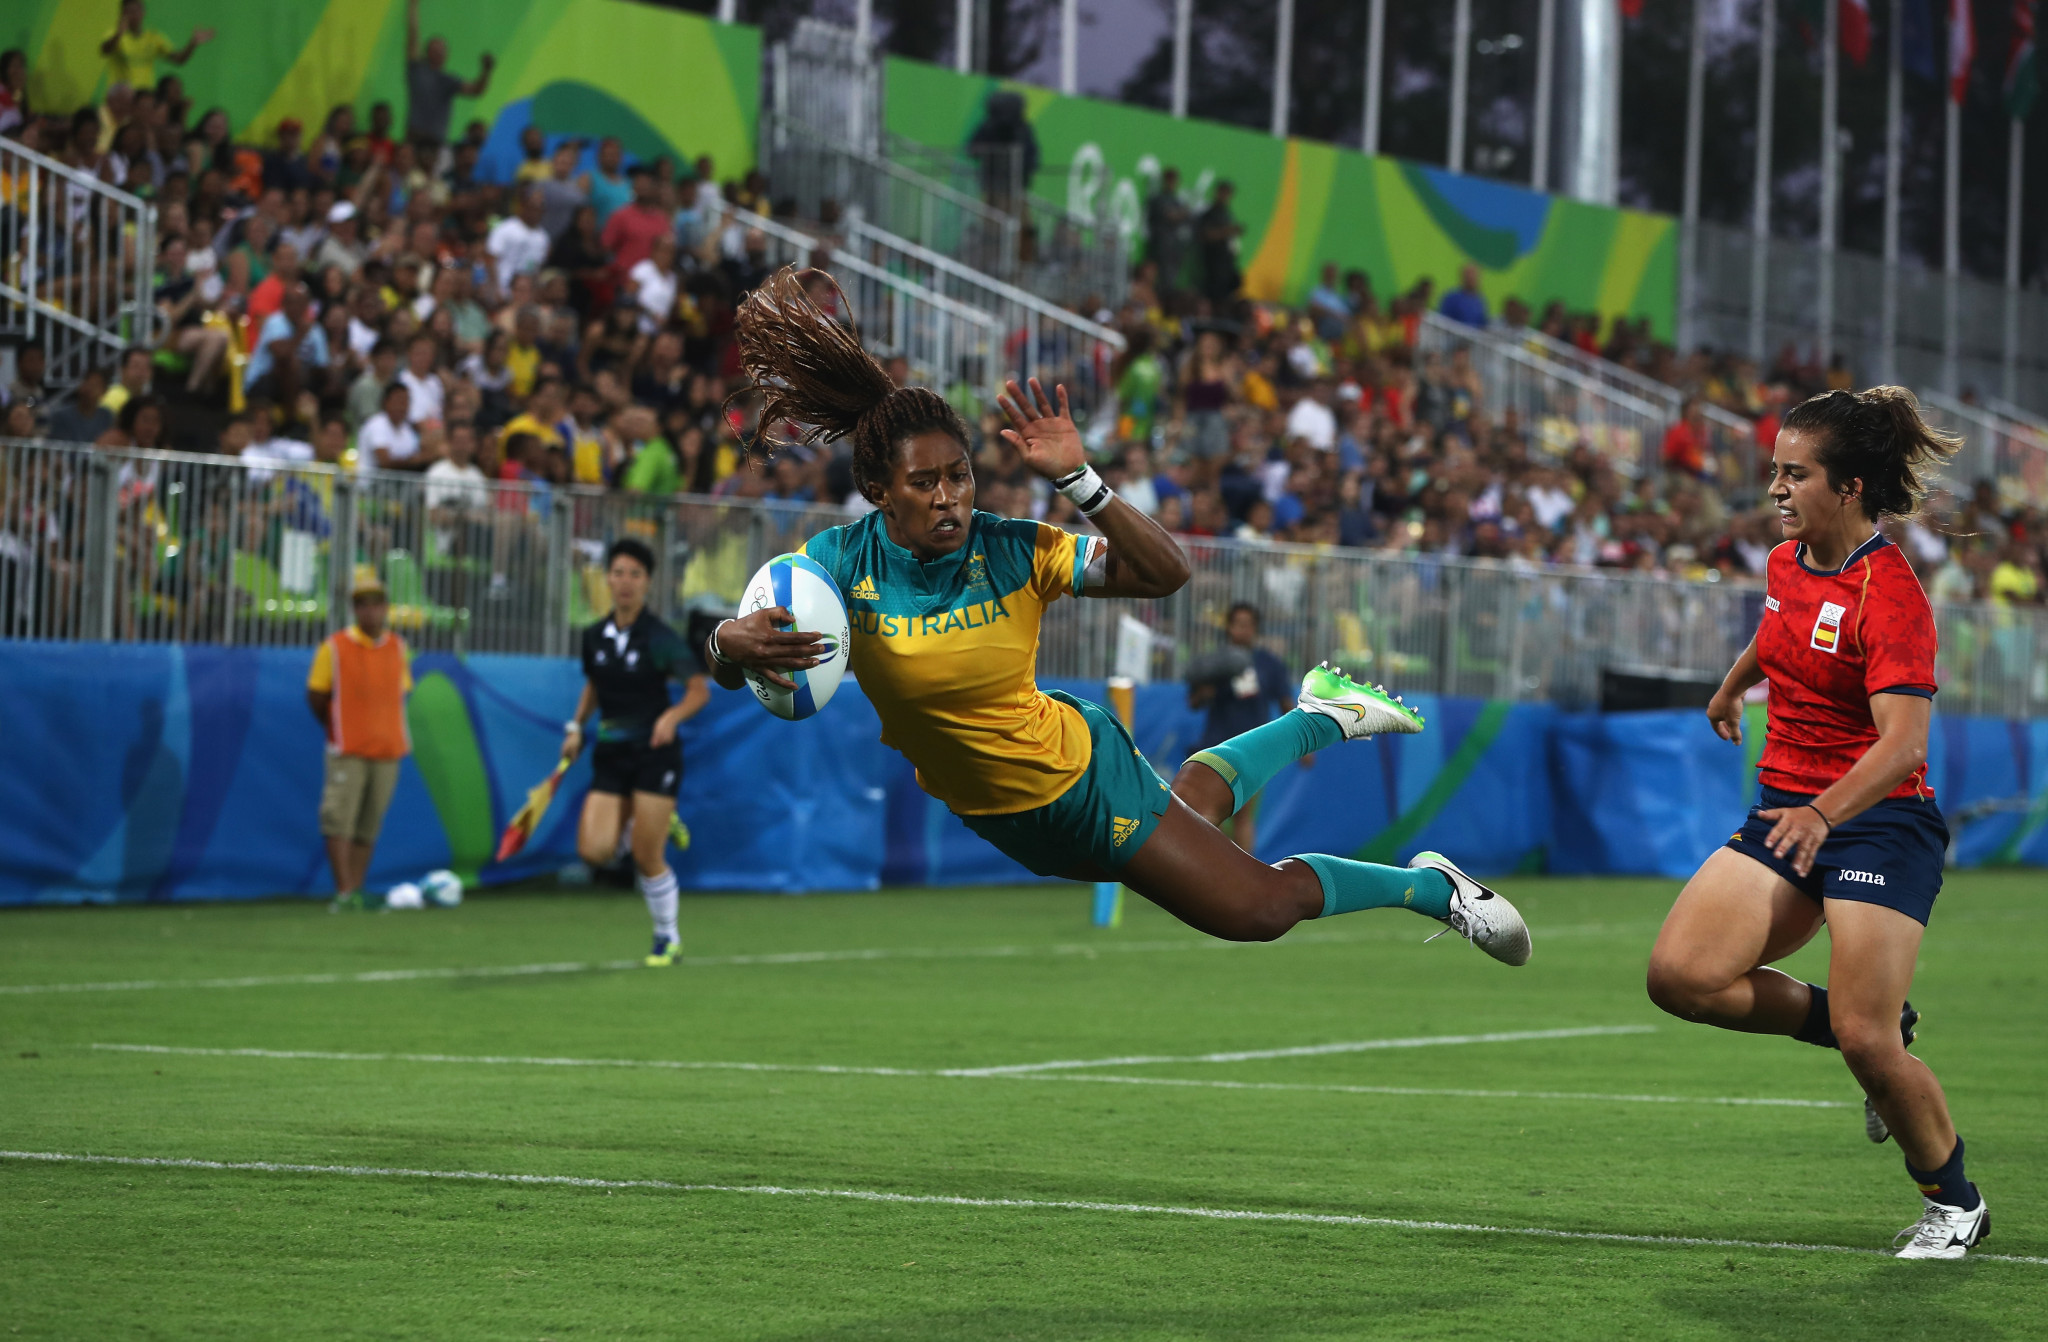 Rugby sevens made its Olympic debut in 2016 ©Getty Images